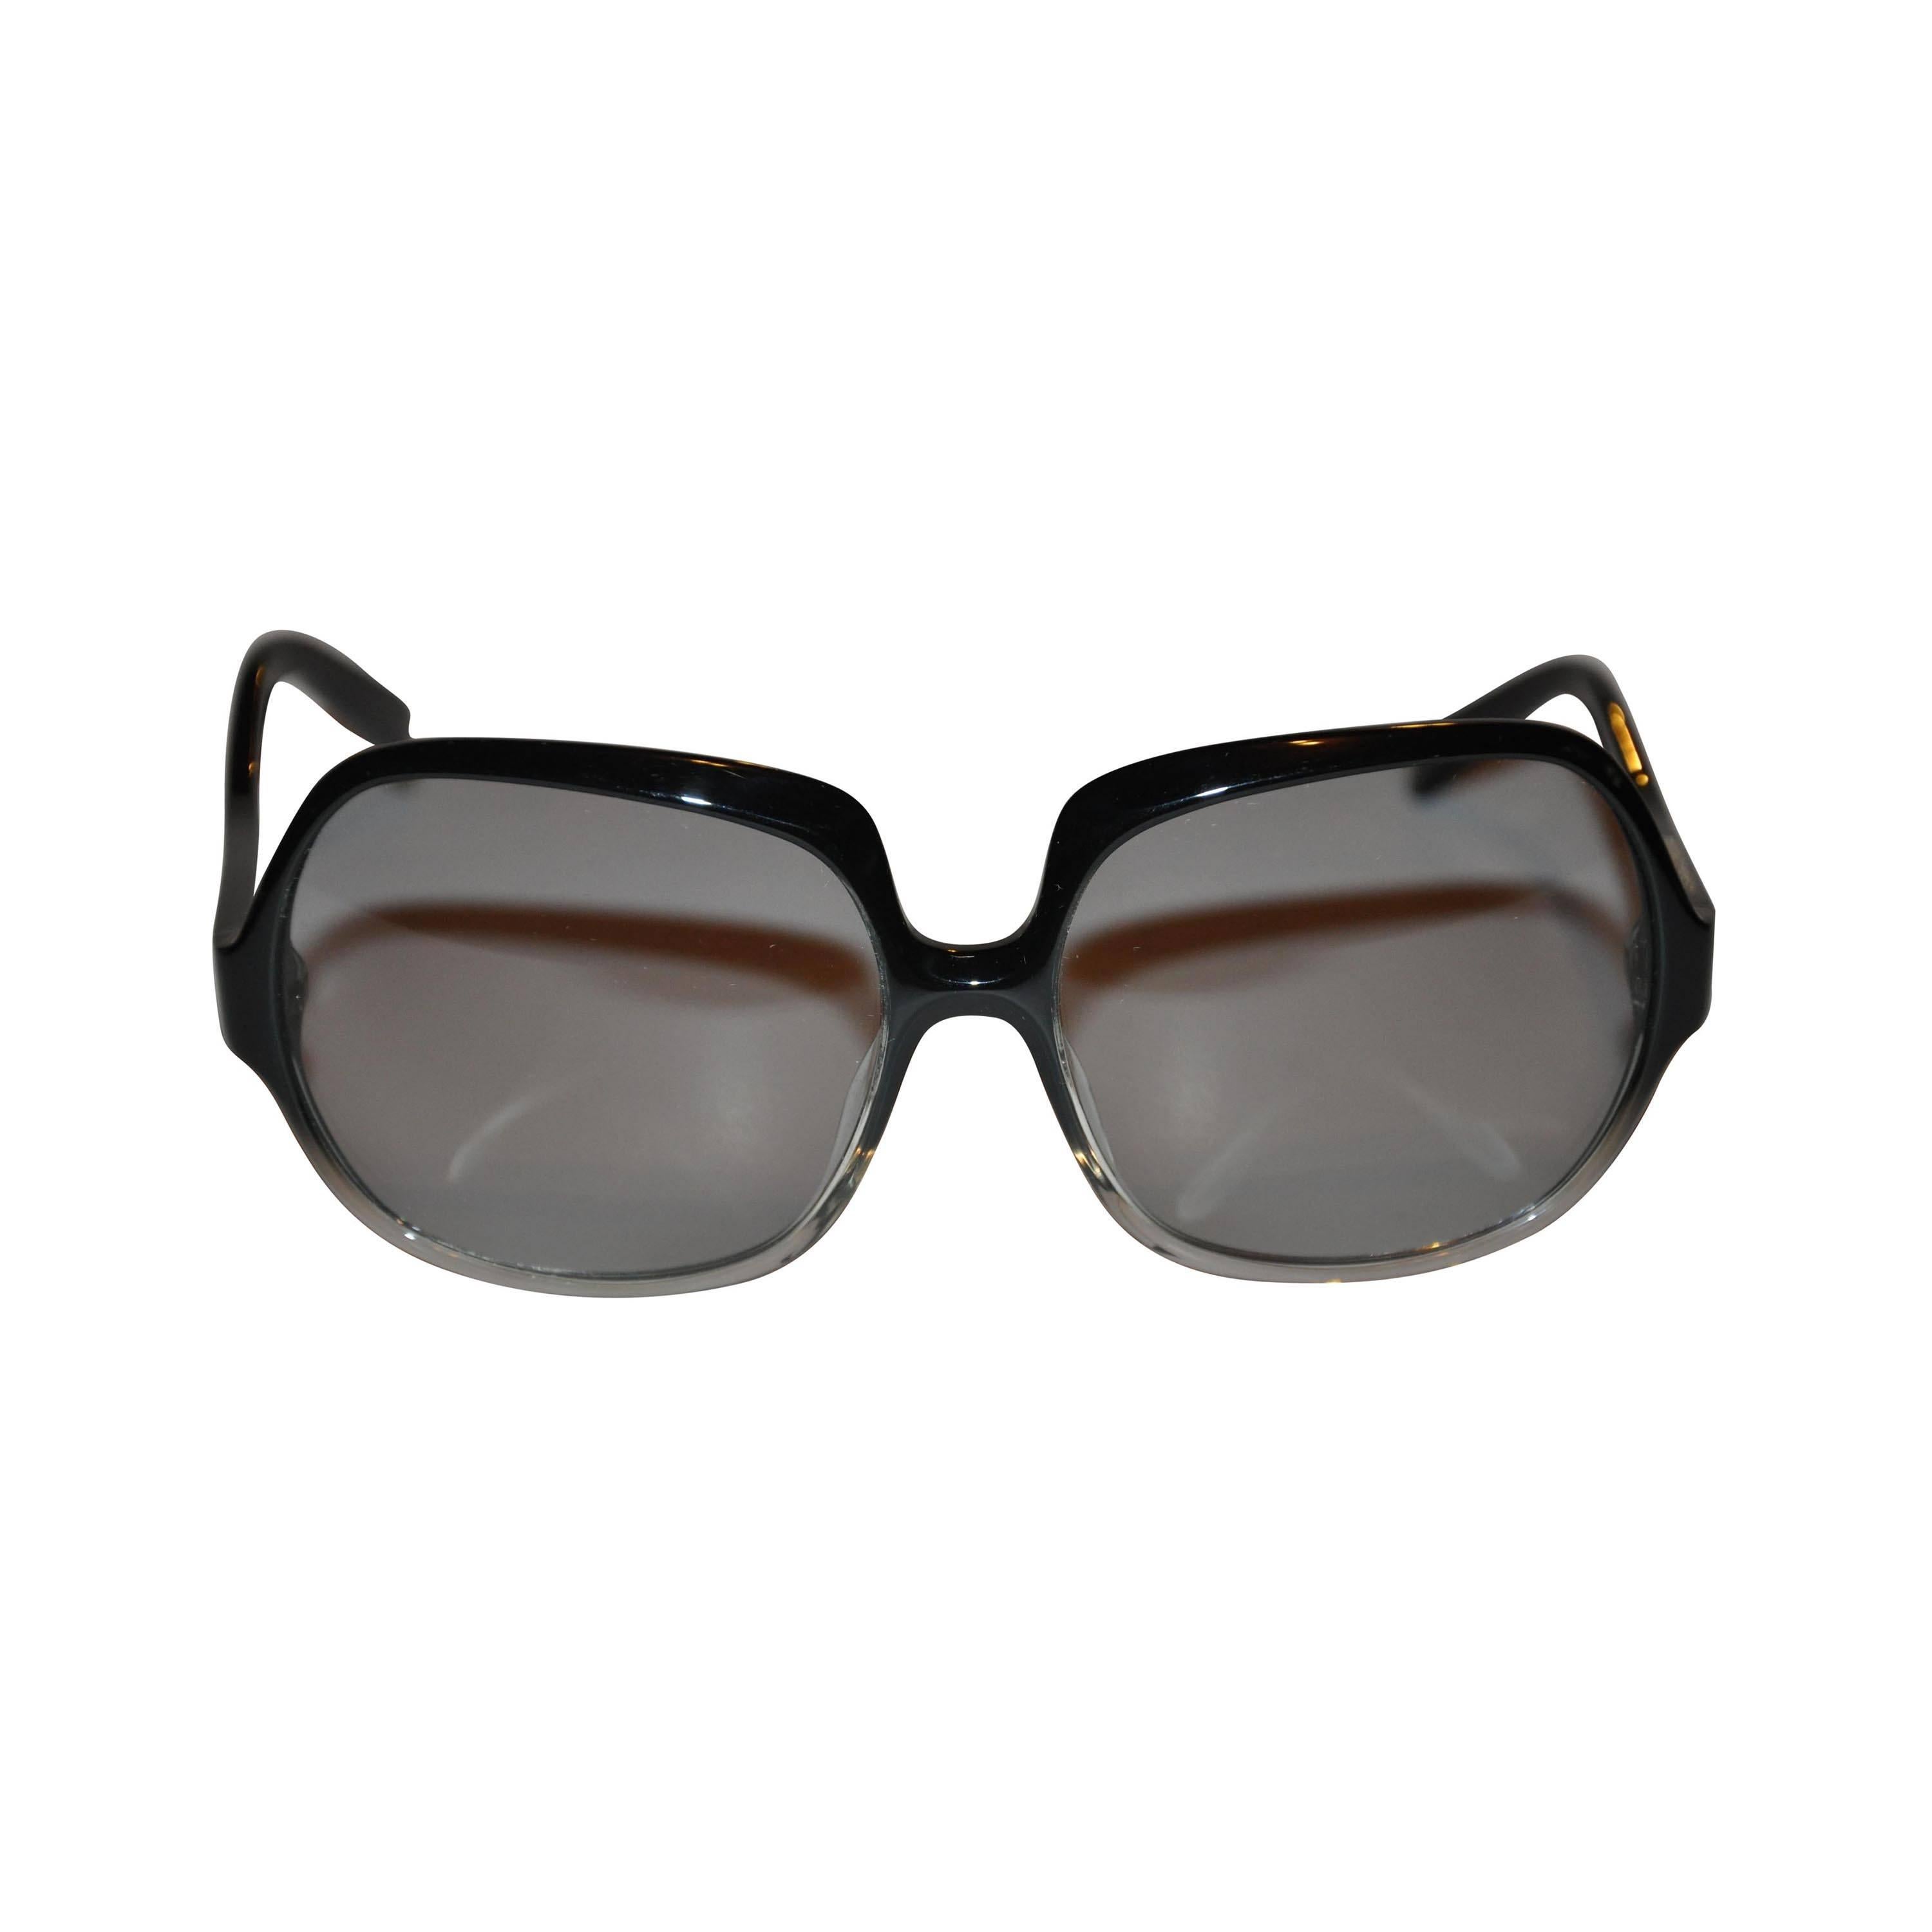 Fabien Baron Black with Clear Lucite Swirl Arms Sunglasses